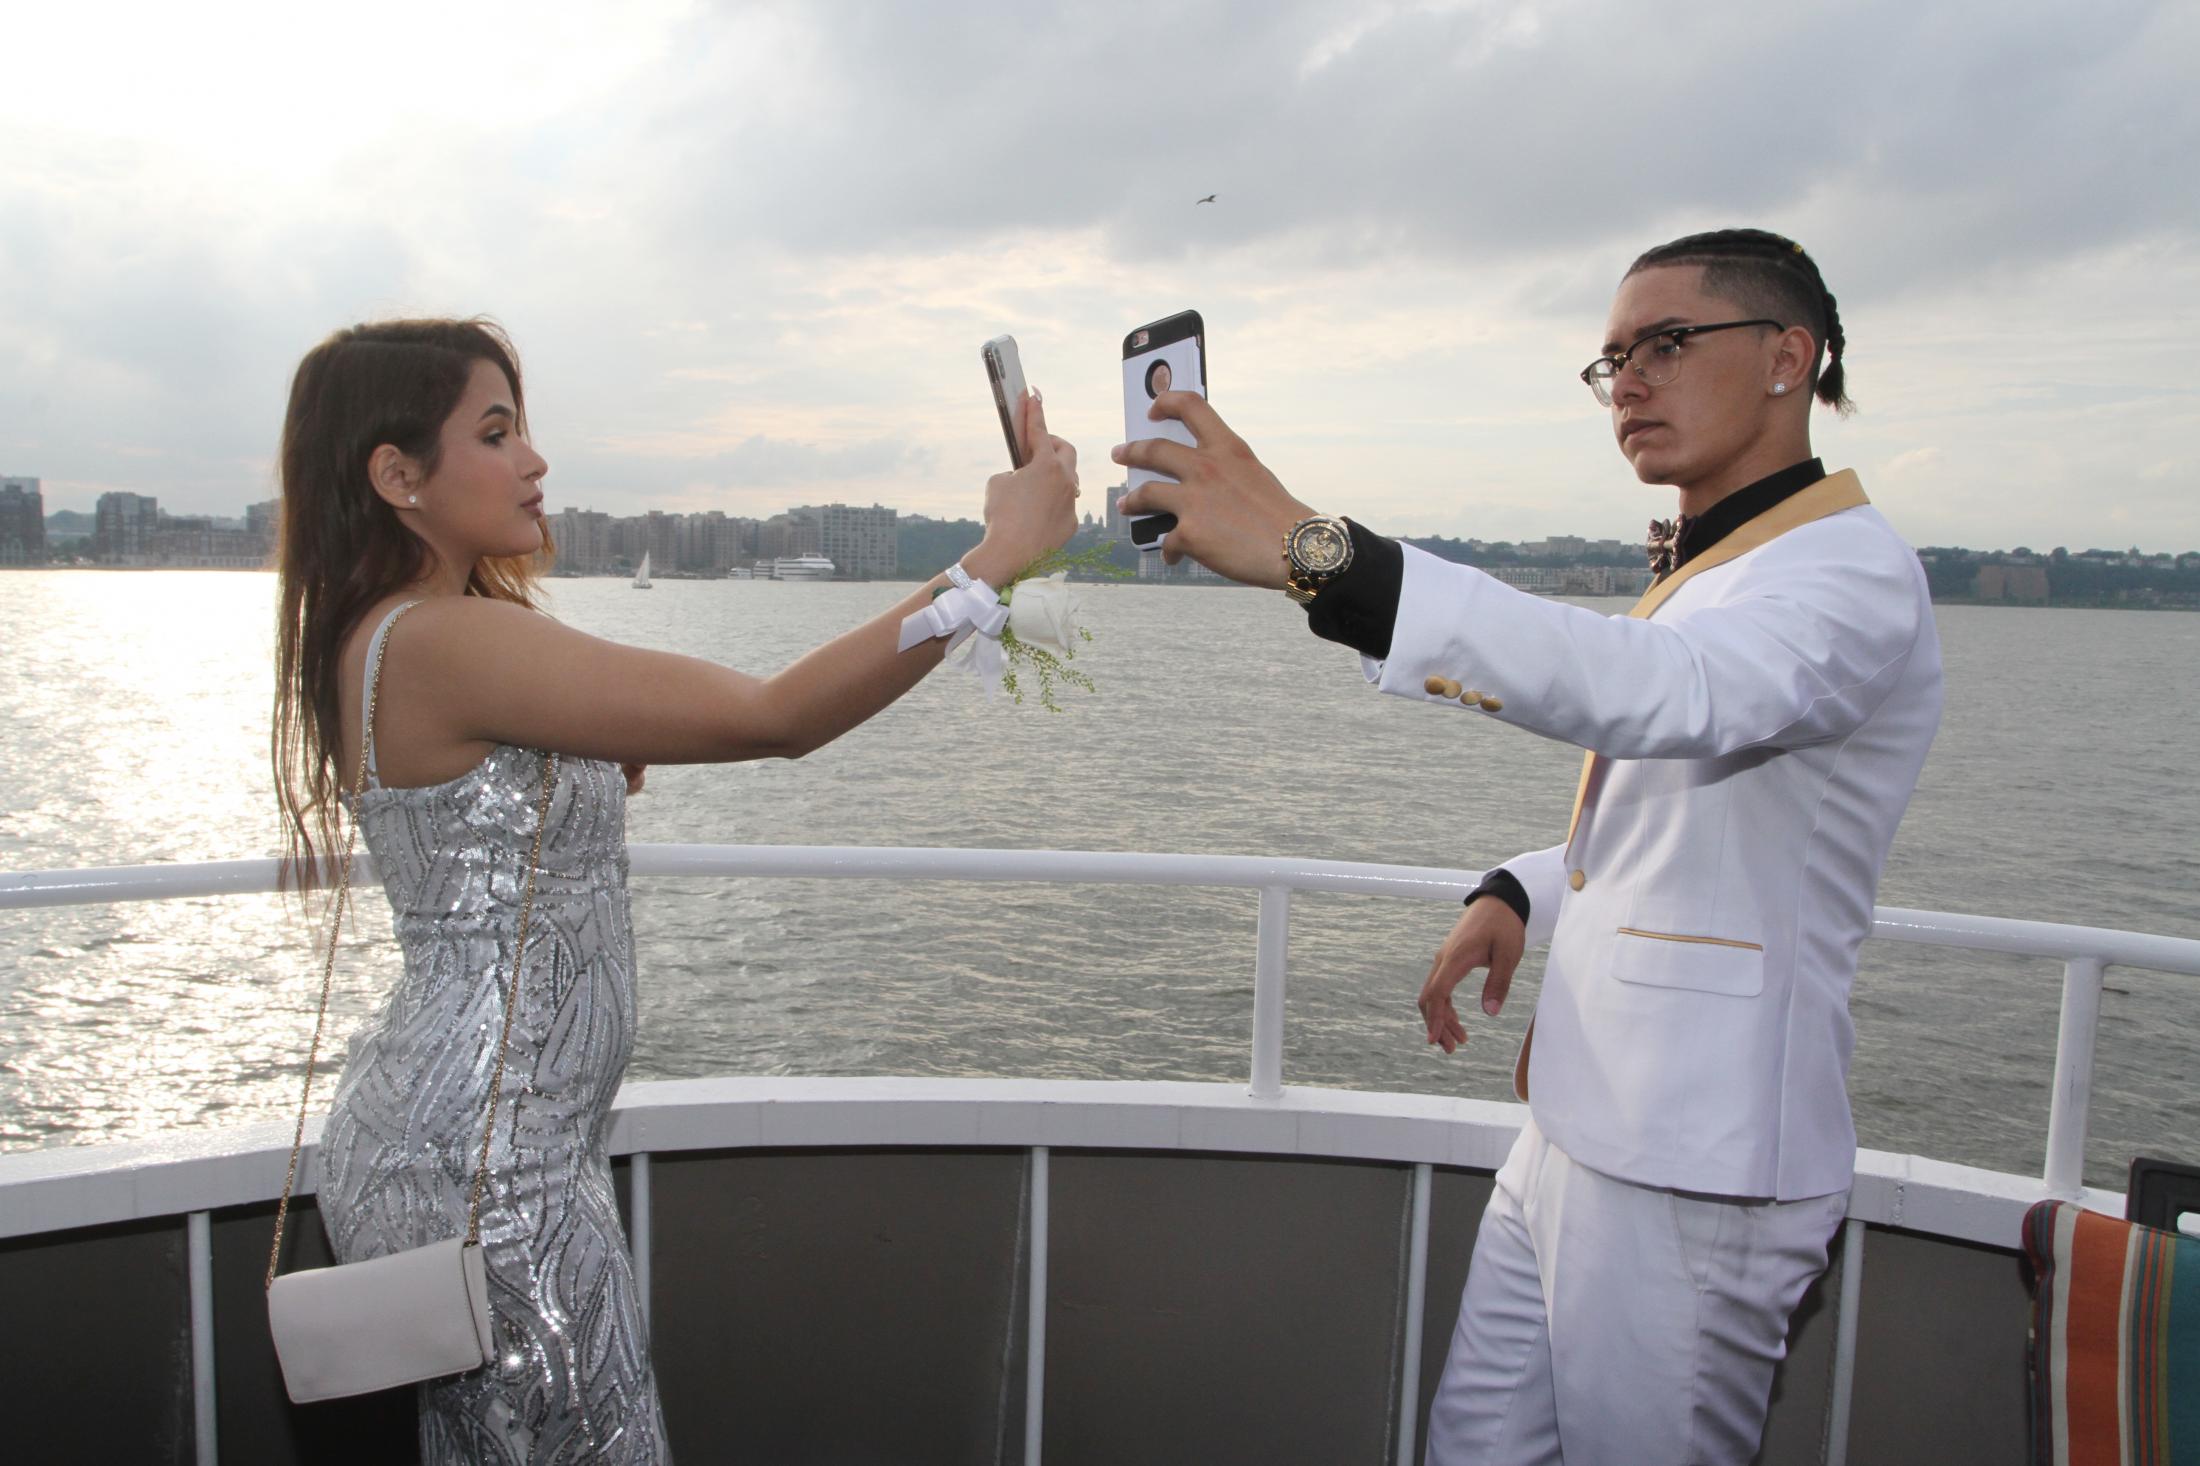 PROM - ON A BOAT